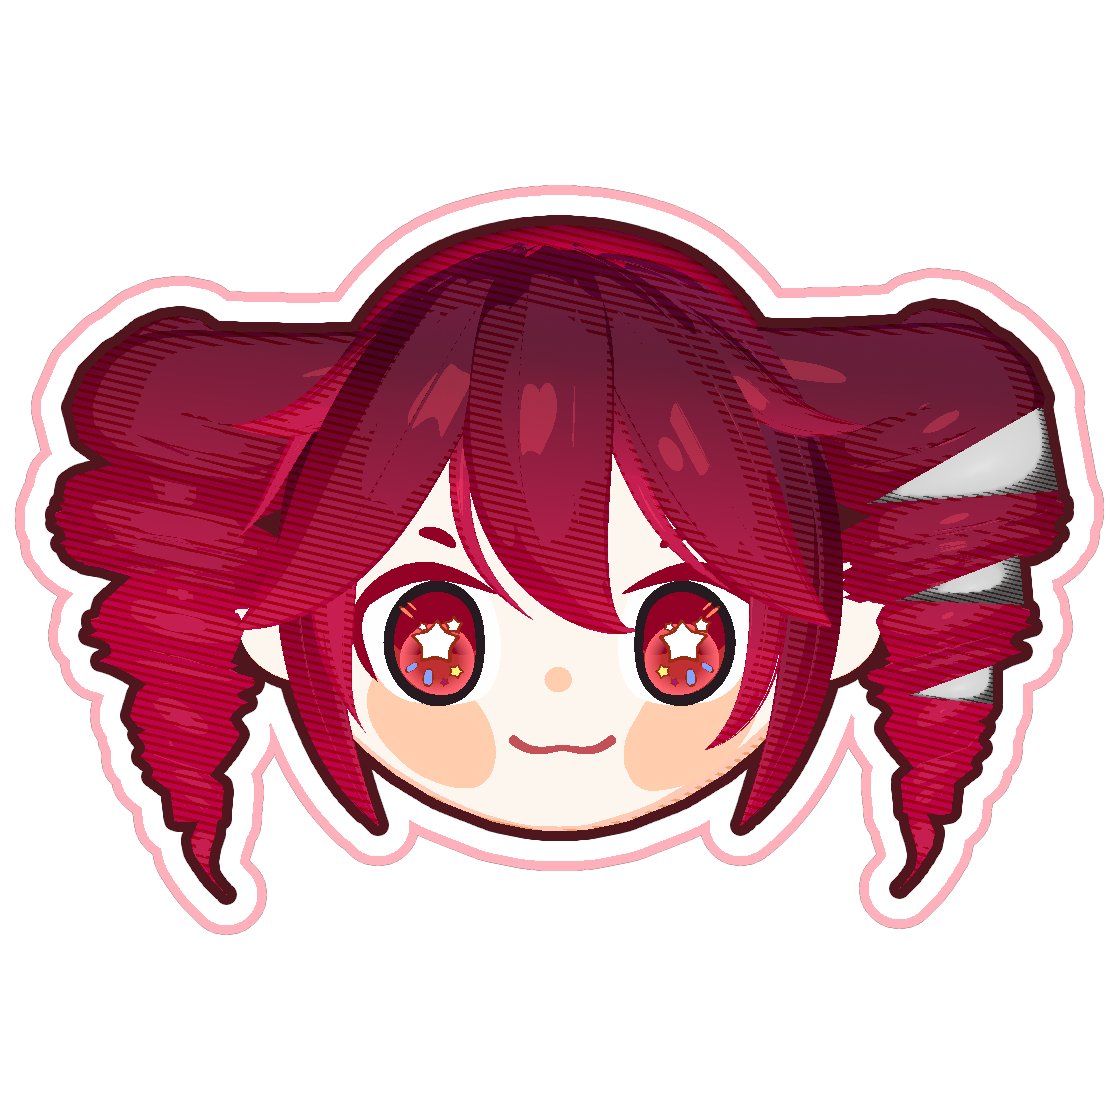 late for the party but still Teto AI is so cute 😭😭😭🥖🥖 her twindrills omg 😭😭 just have to do a fanart real quick #vocaloid #synthv #synthesizerv #vocaloidoriginal #synthvoriginal #kasaneteto #重音テト #blender #3dart #Chibi